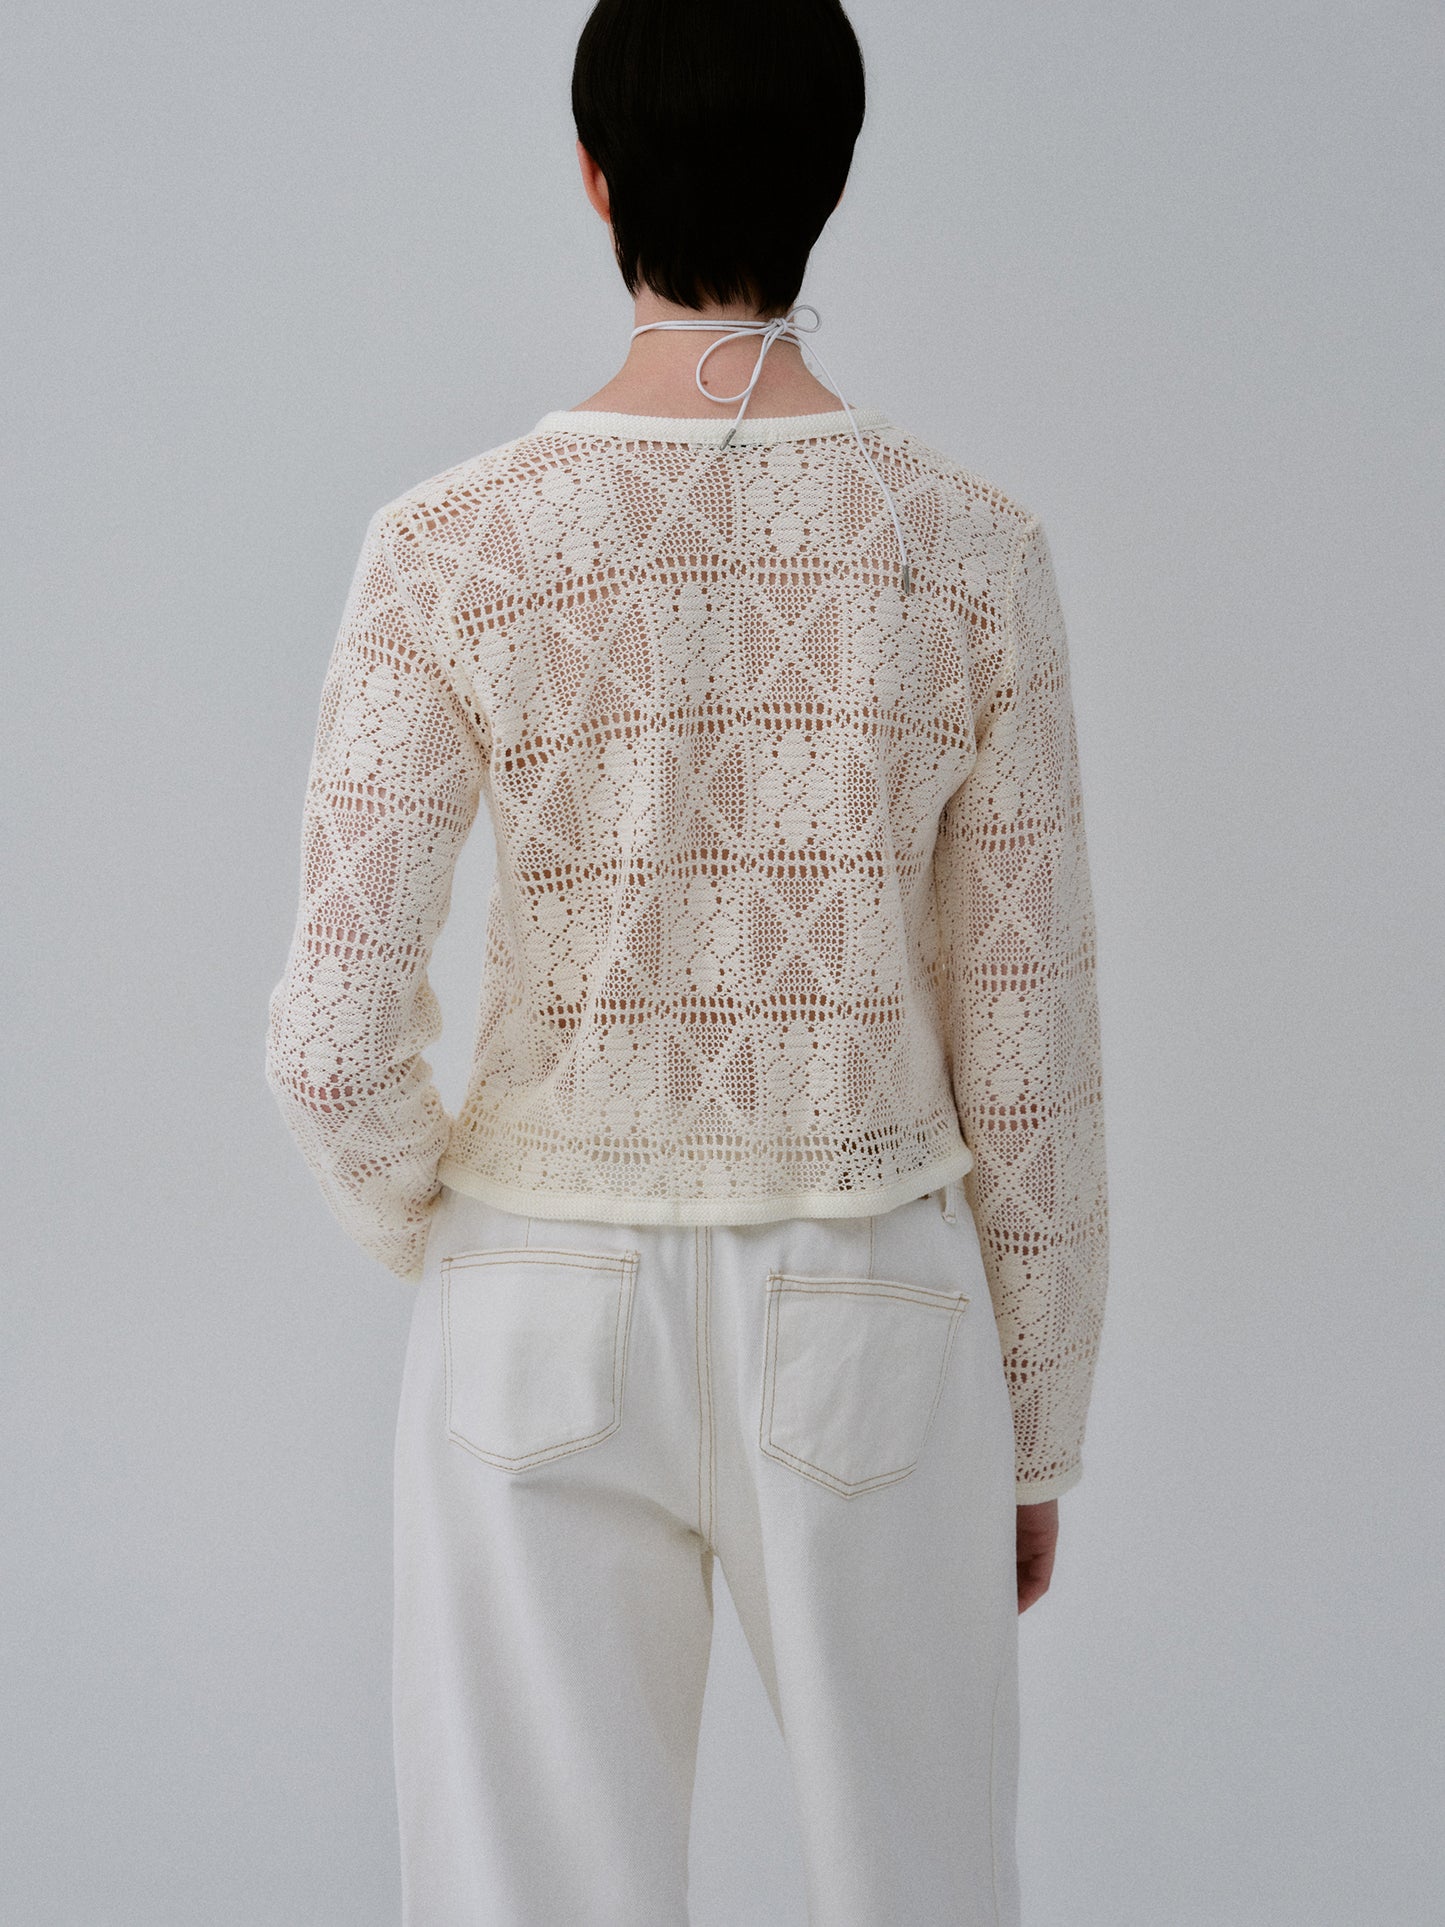 Knitted Crochet Cardigan, Ivory